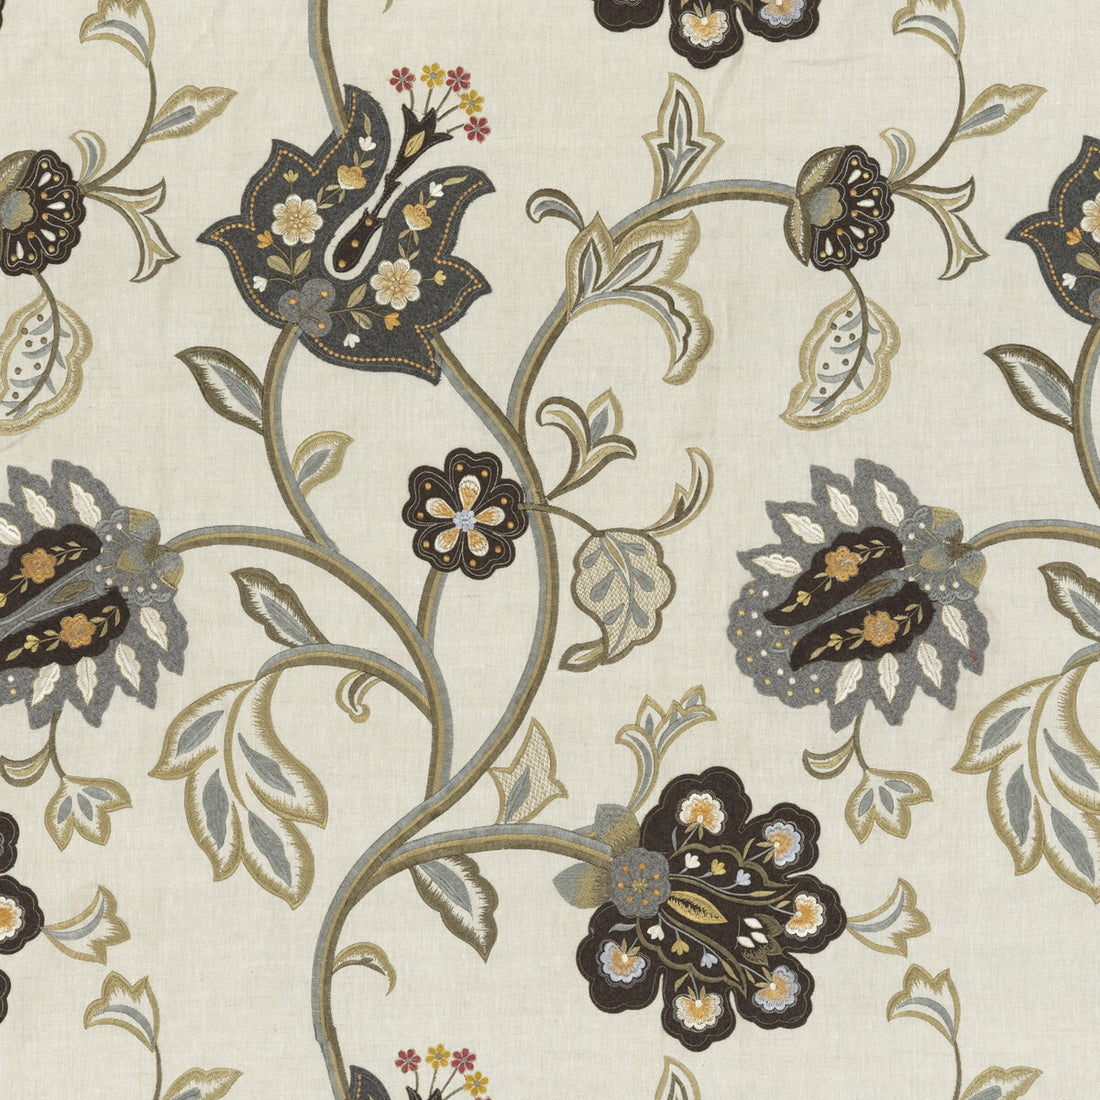 Floral Fantasy fabric in woodsmoke color - pattern FD763.A15.0 - by Mulberry in the Festival collection